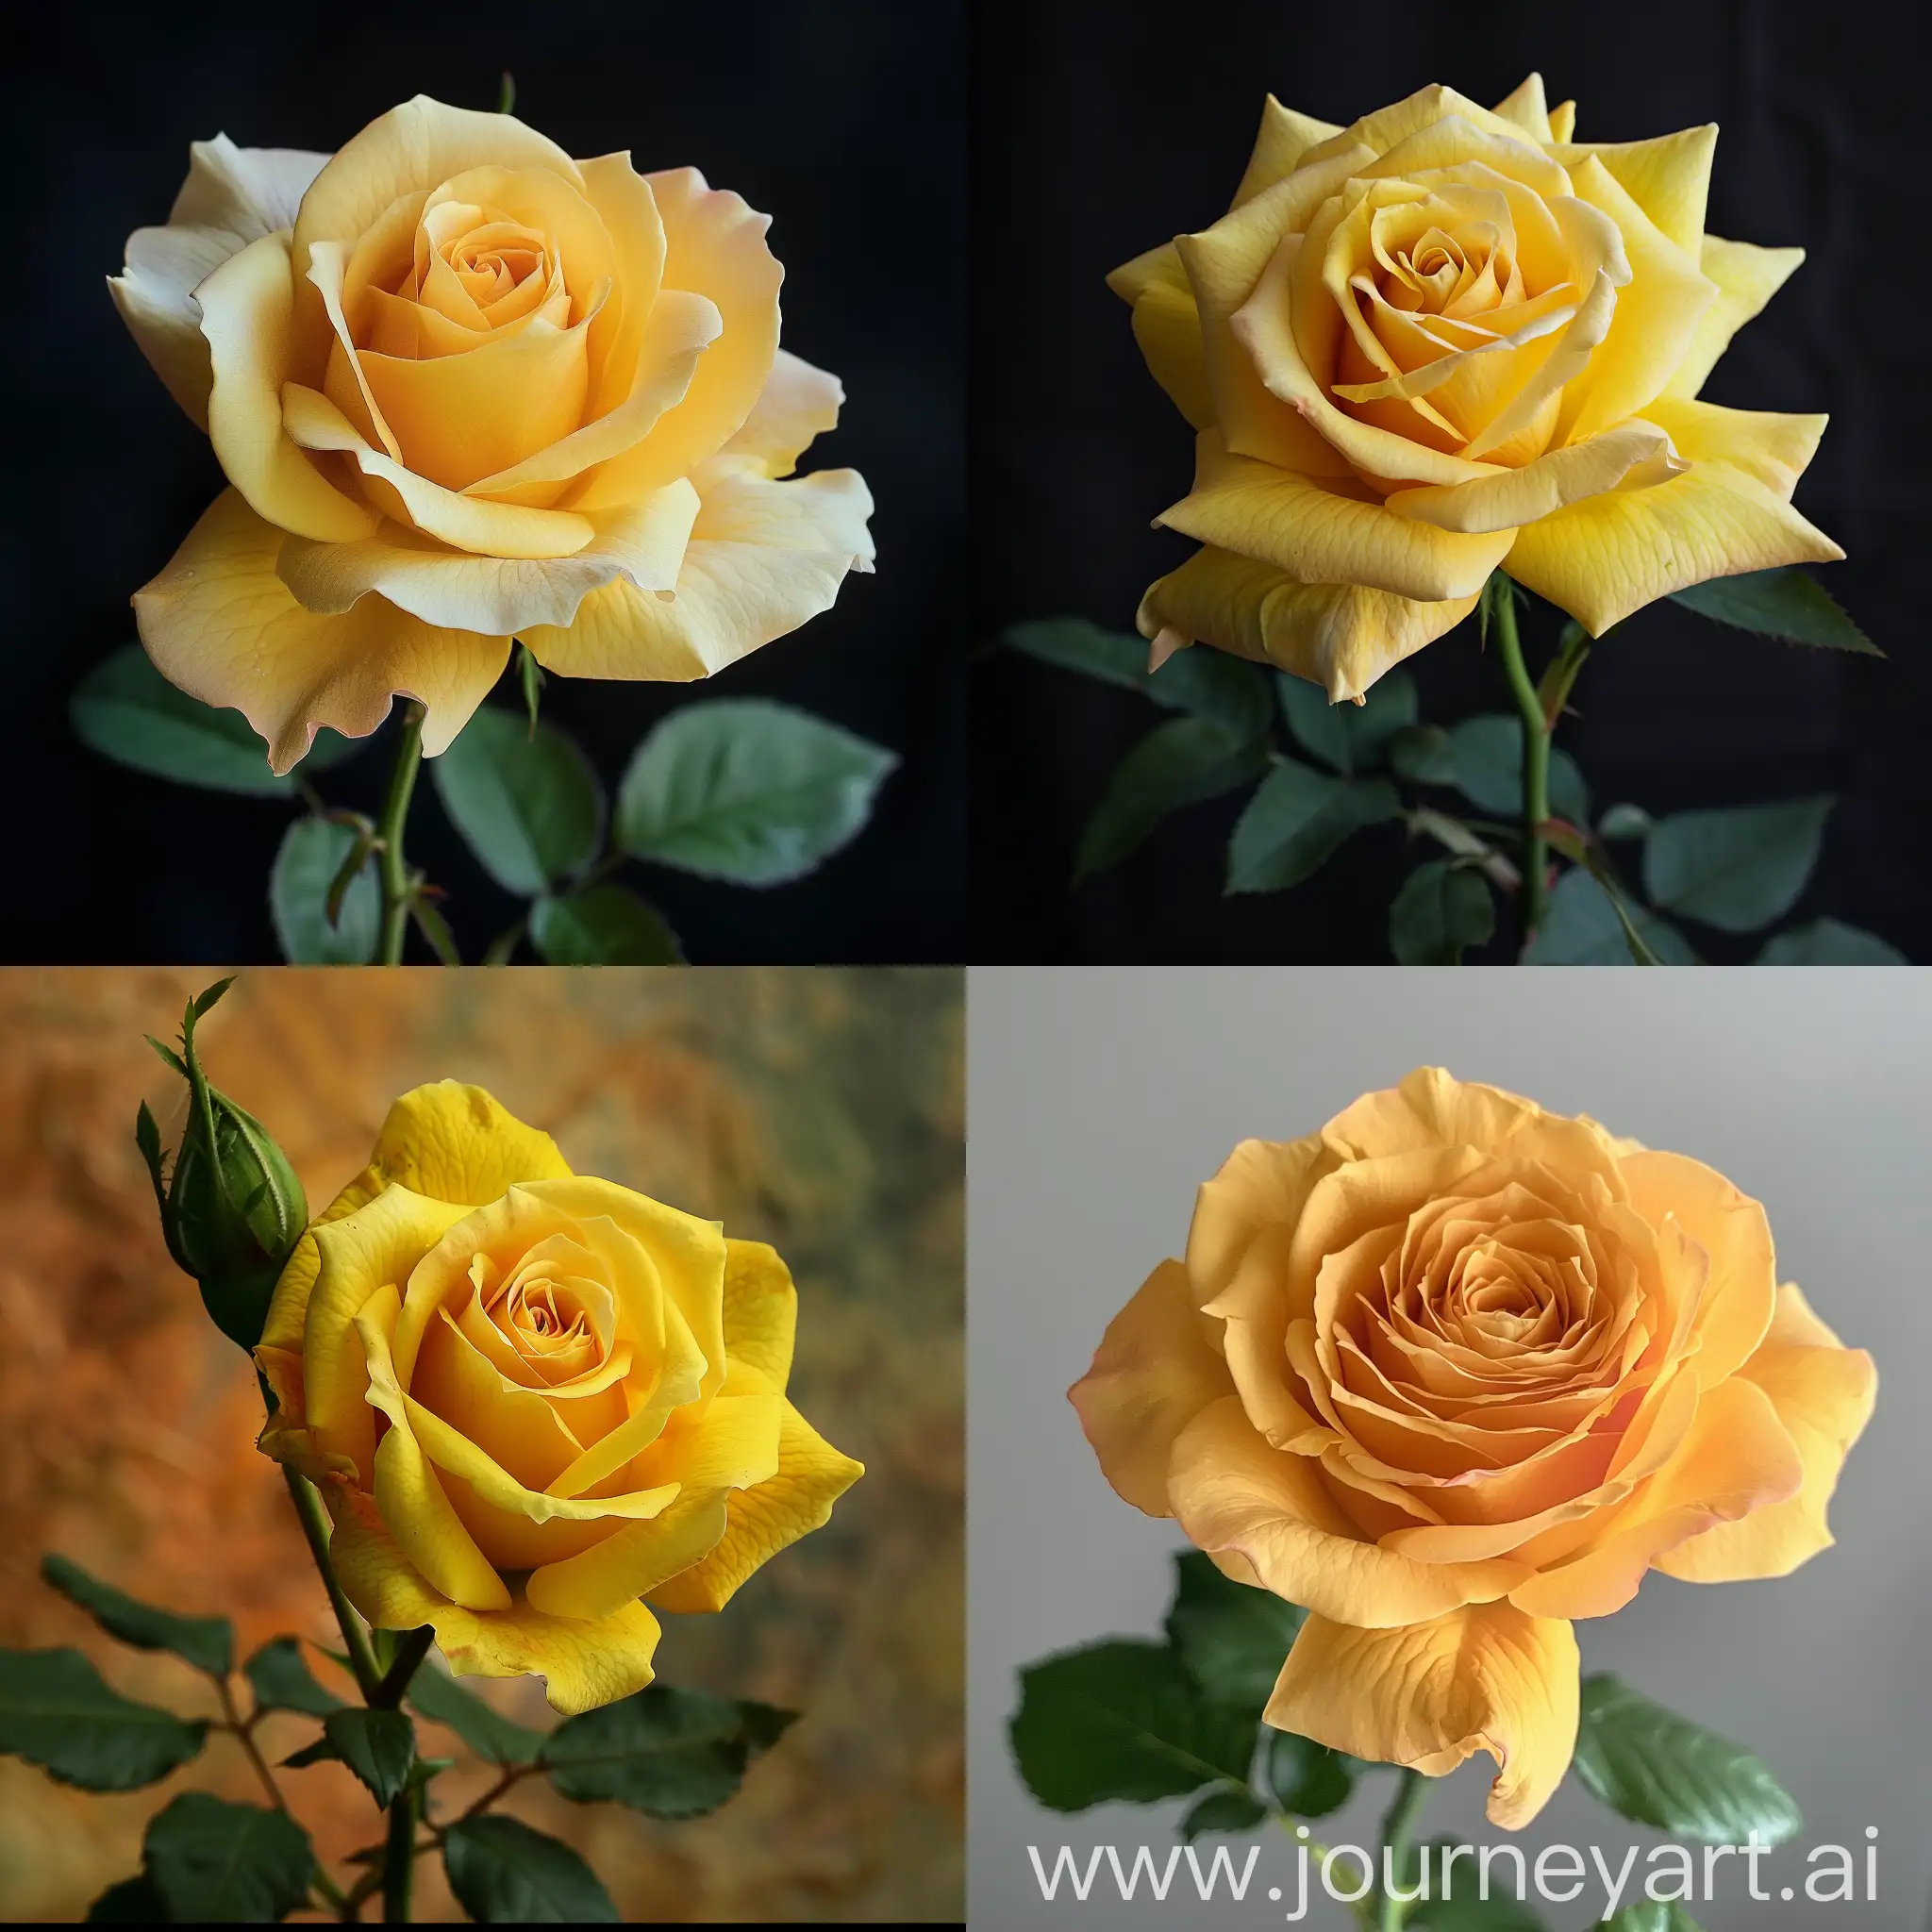 Vibrant-Single-Yellow-Rose-in-High-Saturation